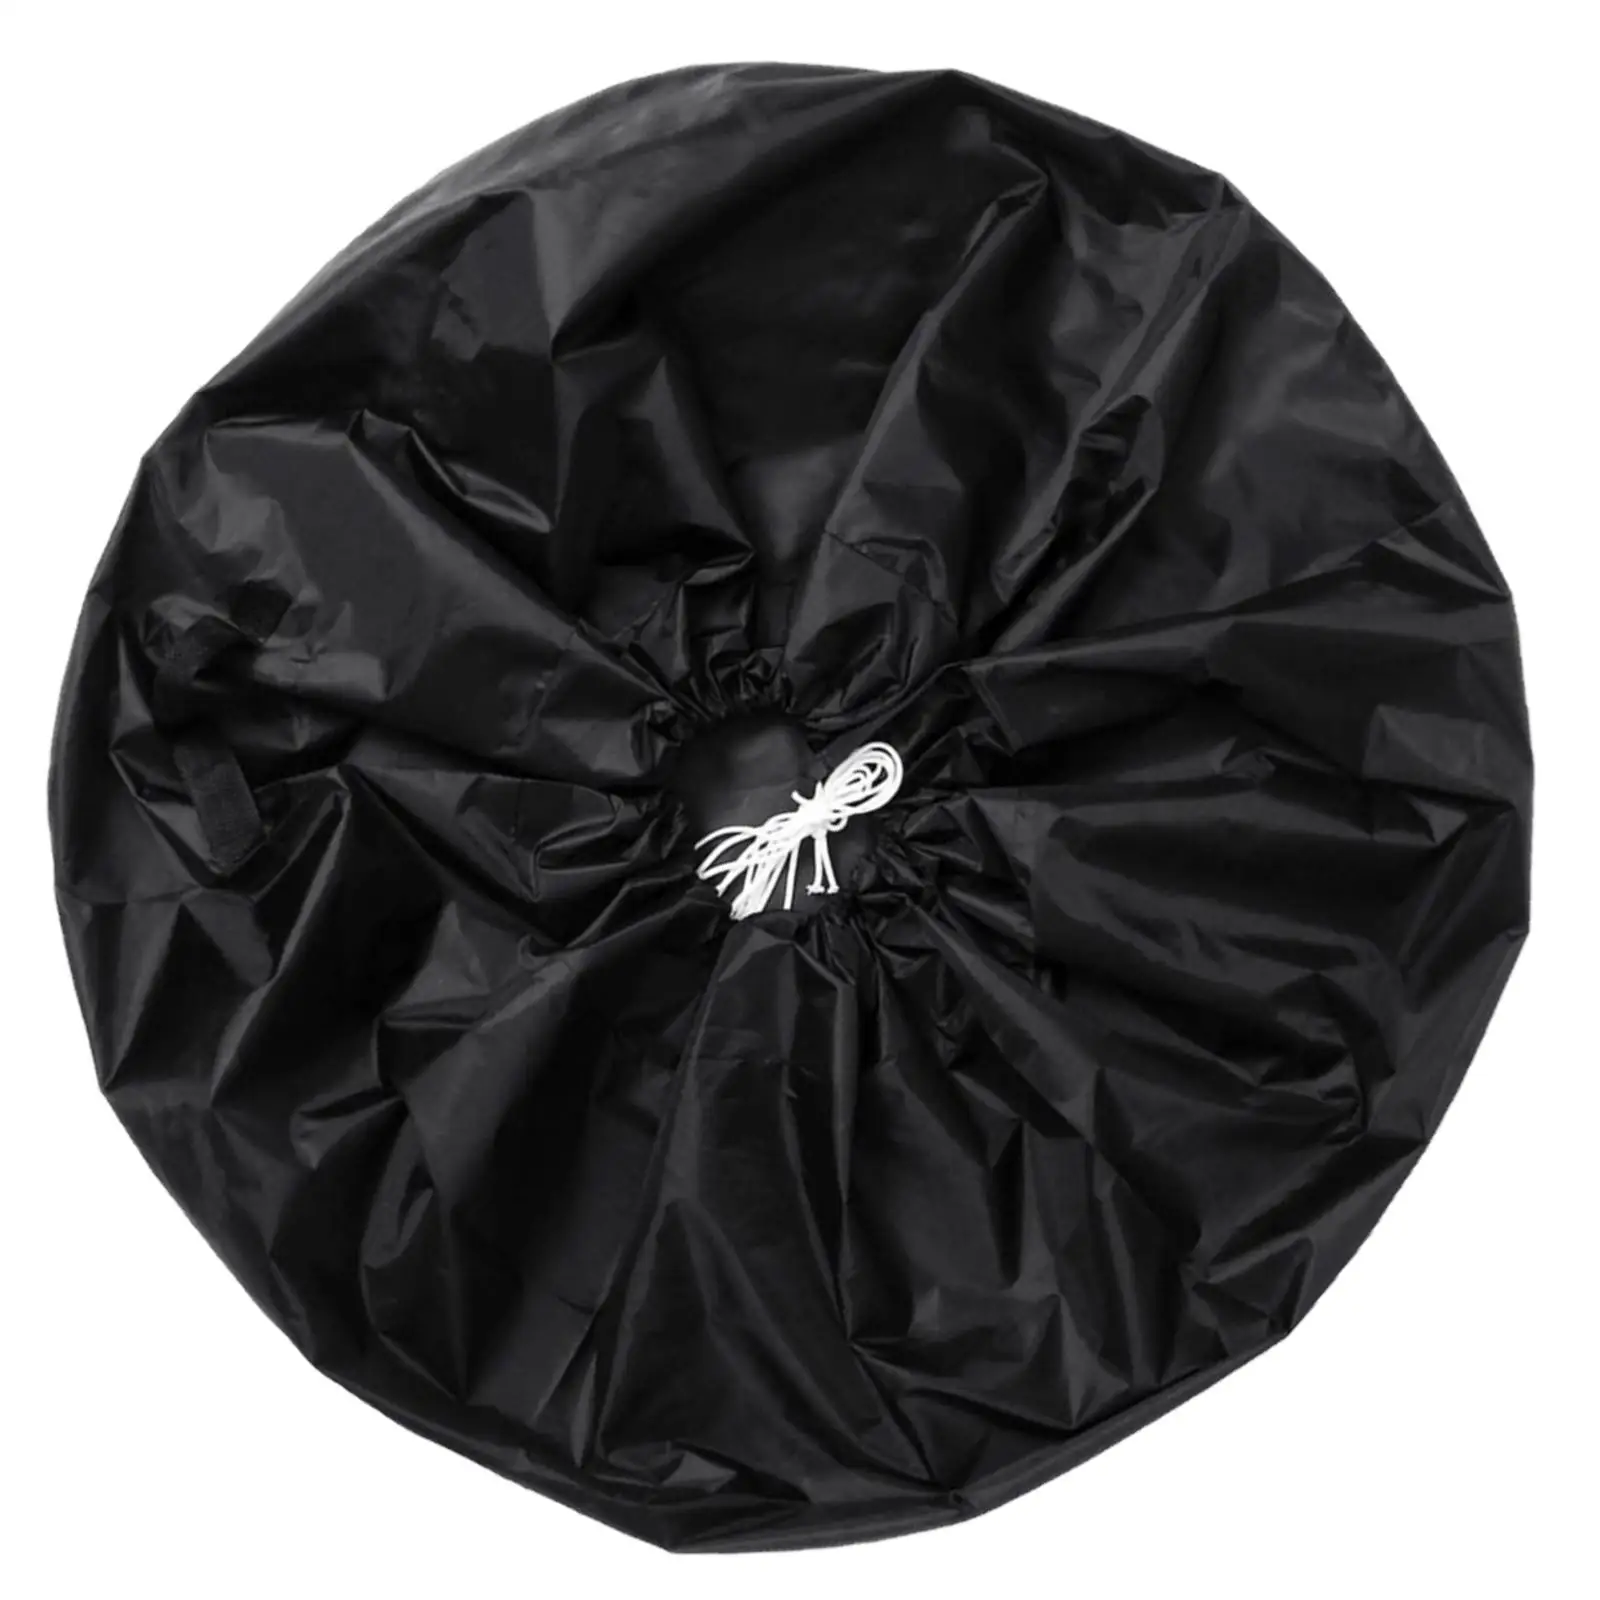 1 Package Tyre Cover Entire Black Protective  Overall Tyre for Car